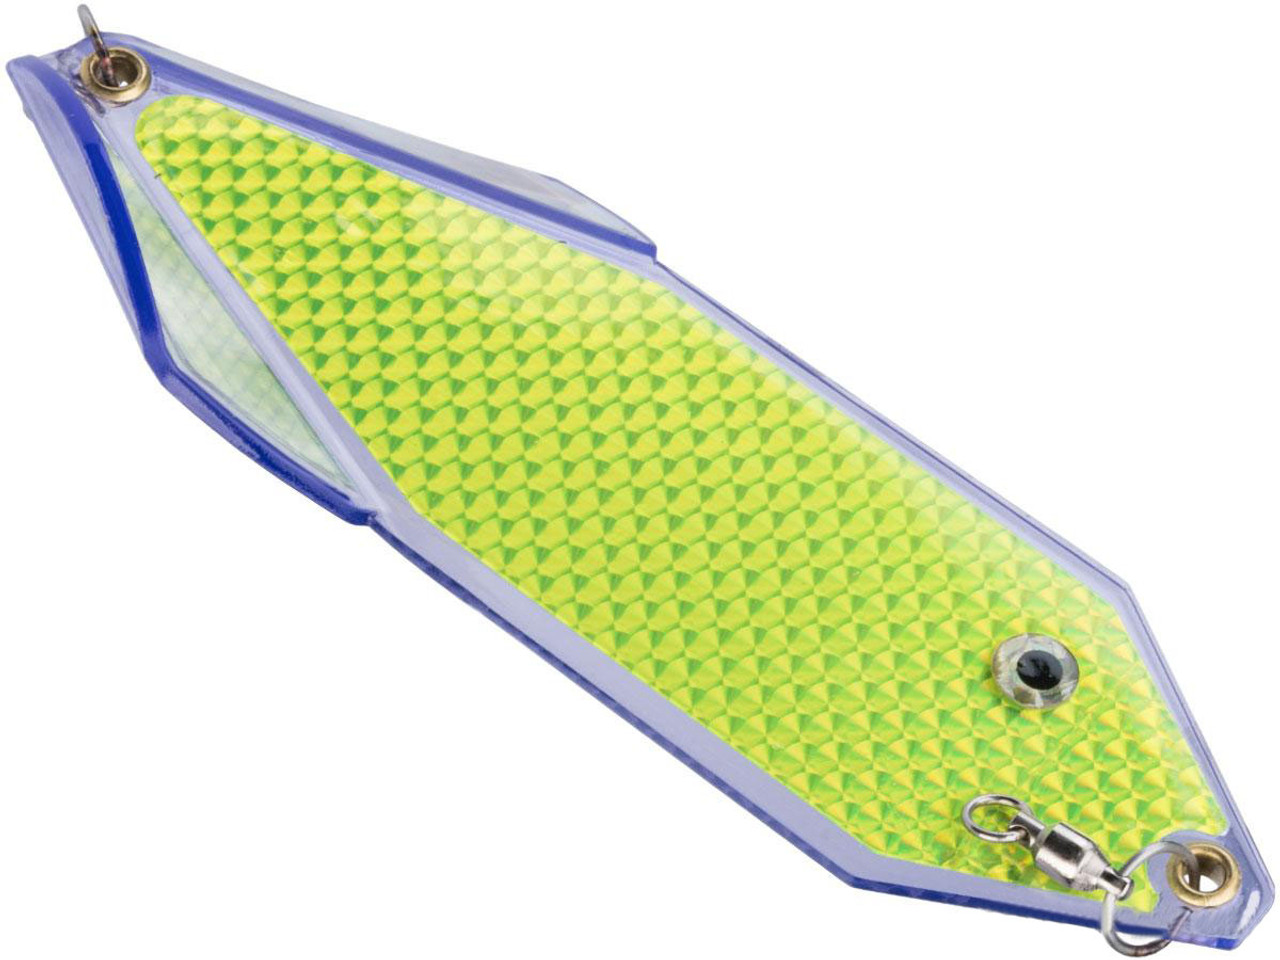 Pro-Troll SpinRay Flasher 8 Fishing Lure (Color: UV Blade w/ Chartreuse Tape)  - Hero Outdoors